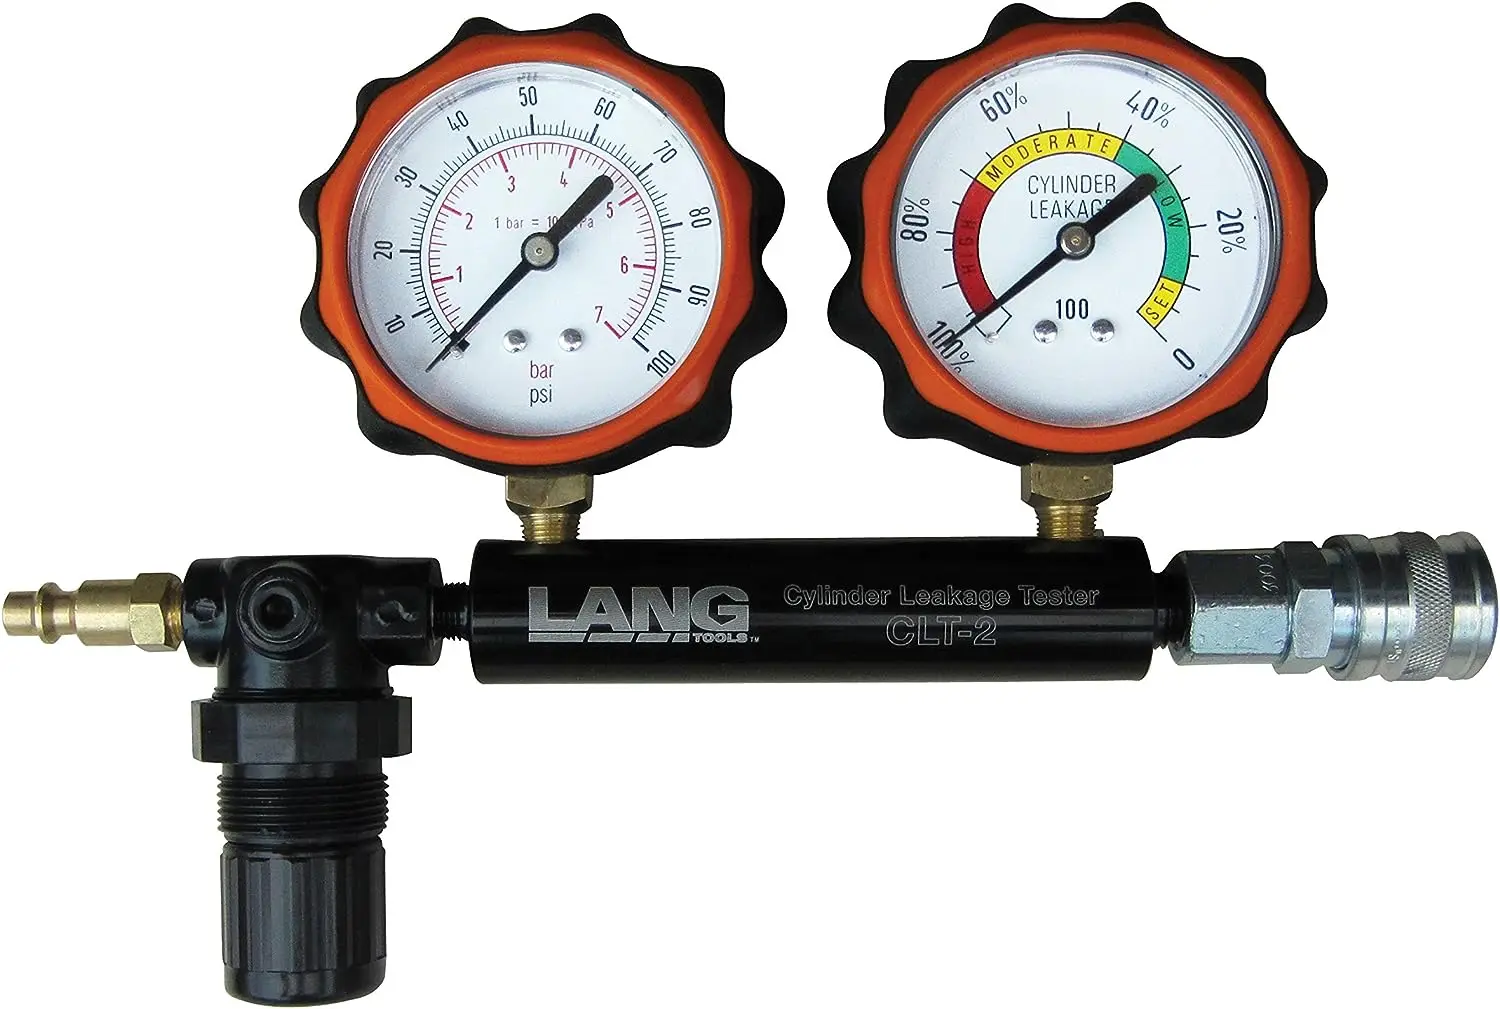 

100 PSI Cylinder Leakage Tester with 2 Gauges, One Size